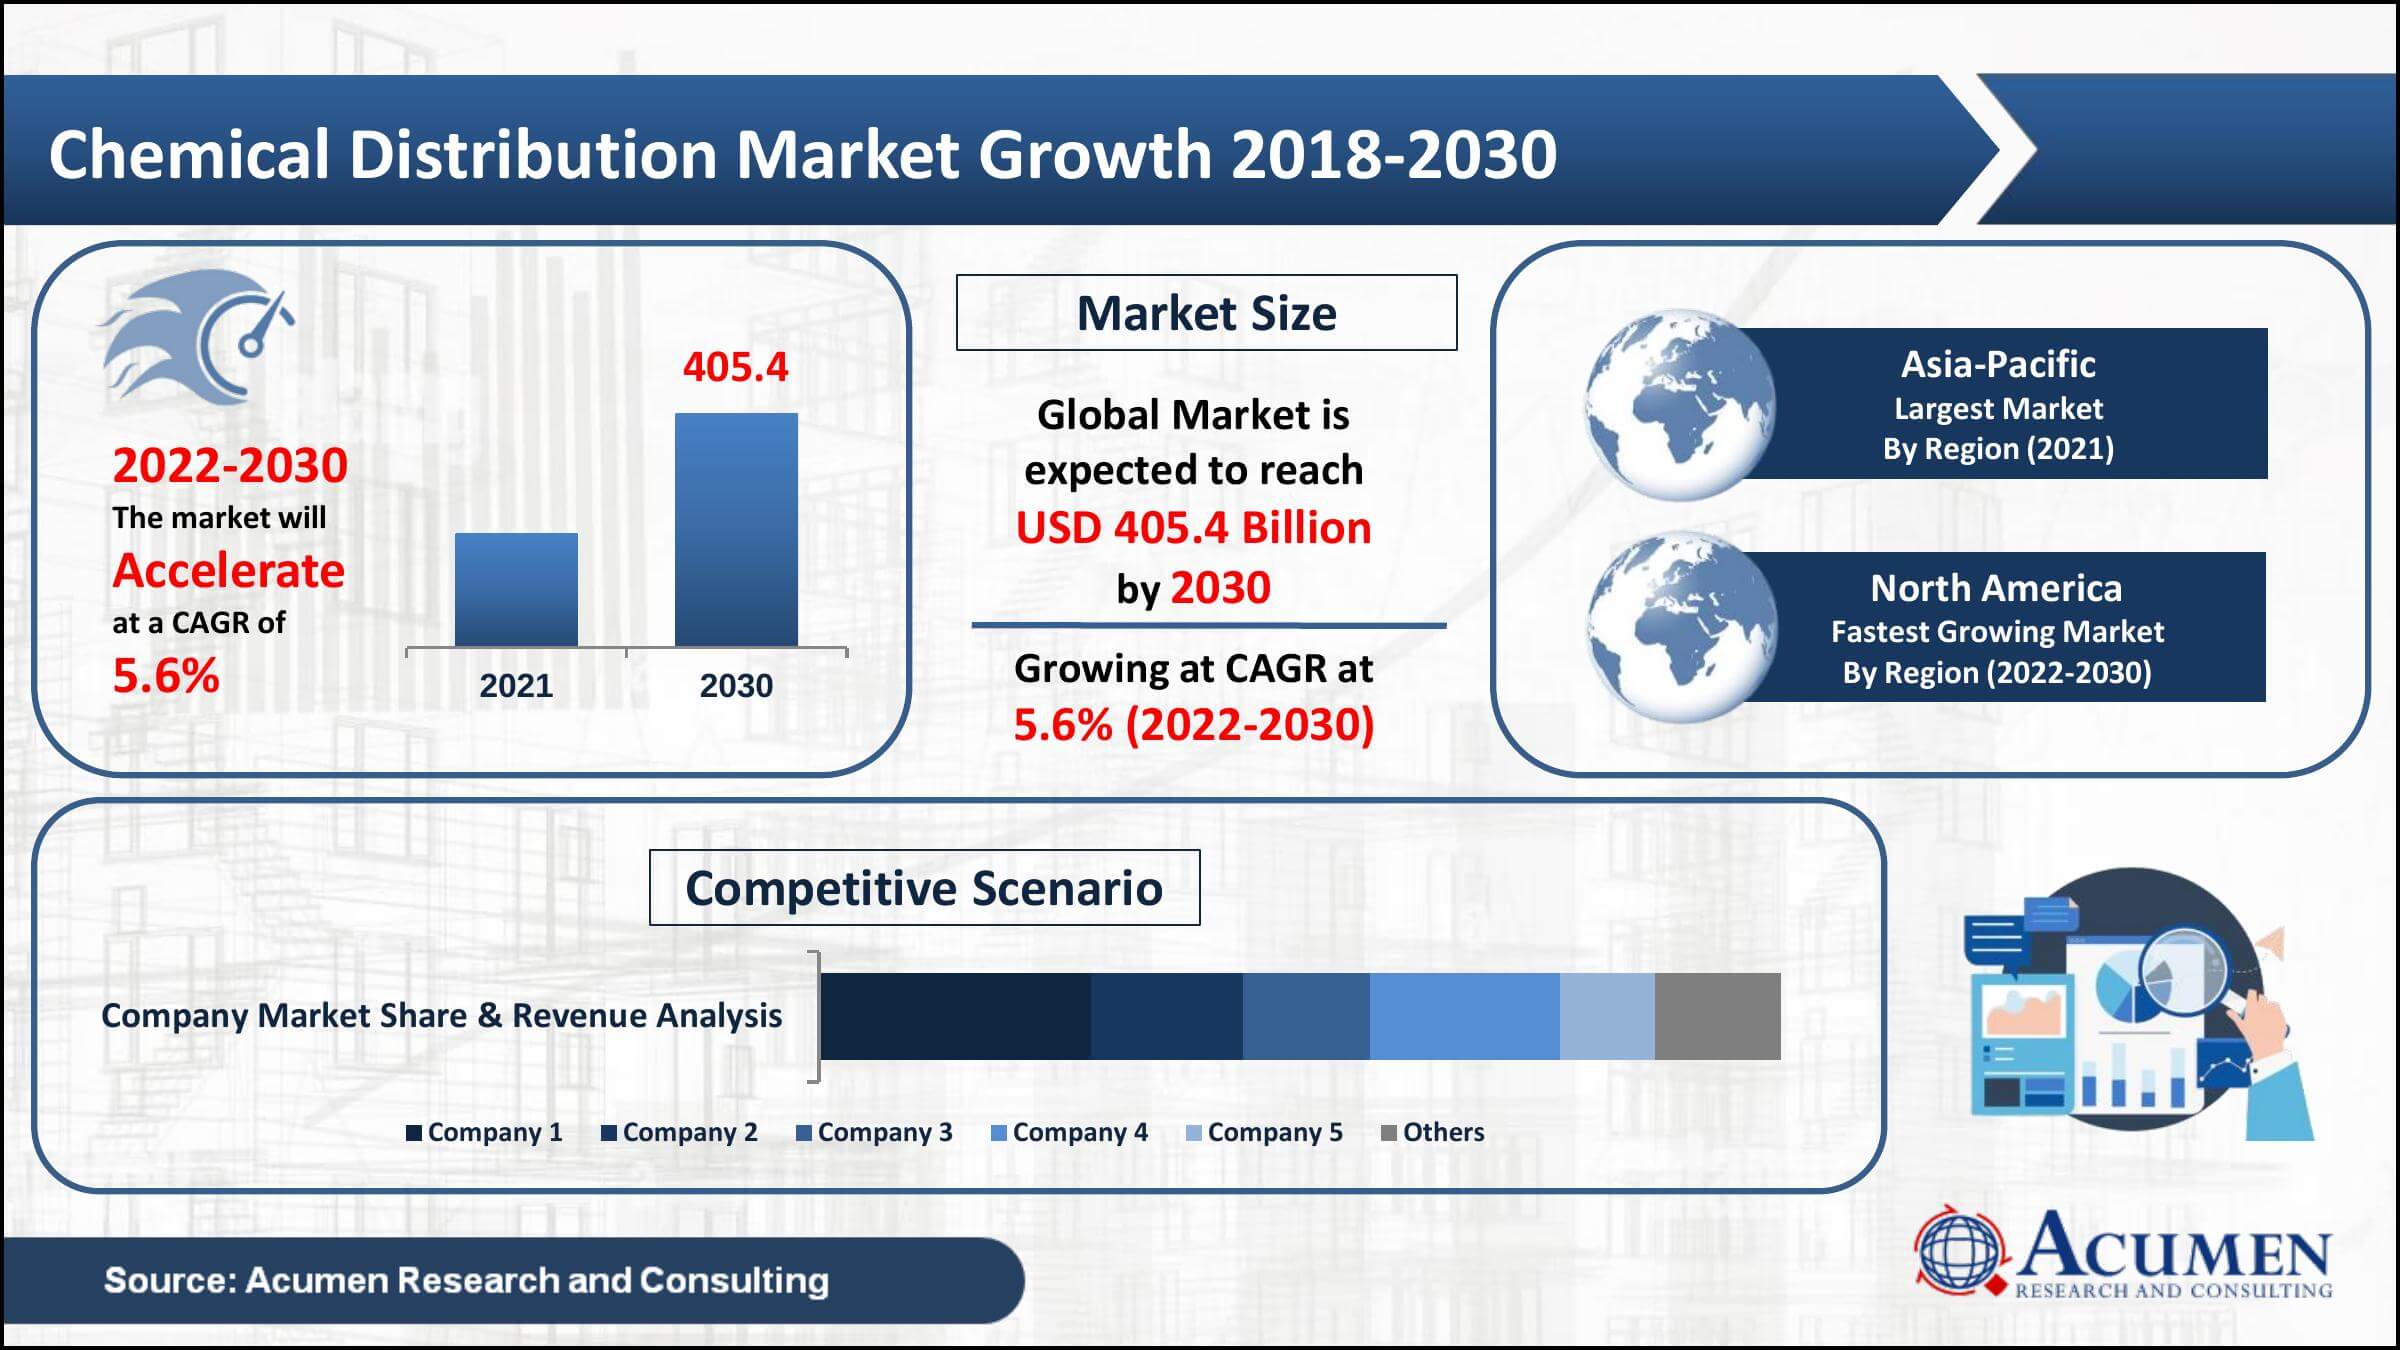 Global chemical distribution market revenue collected USD 253.1 Billion in 2021, with a 5.6% CAGR between 2022 and 2030